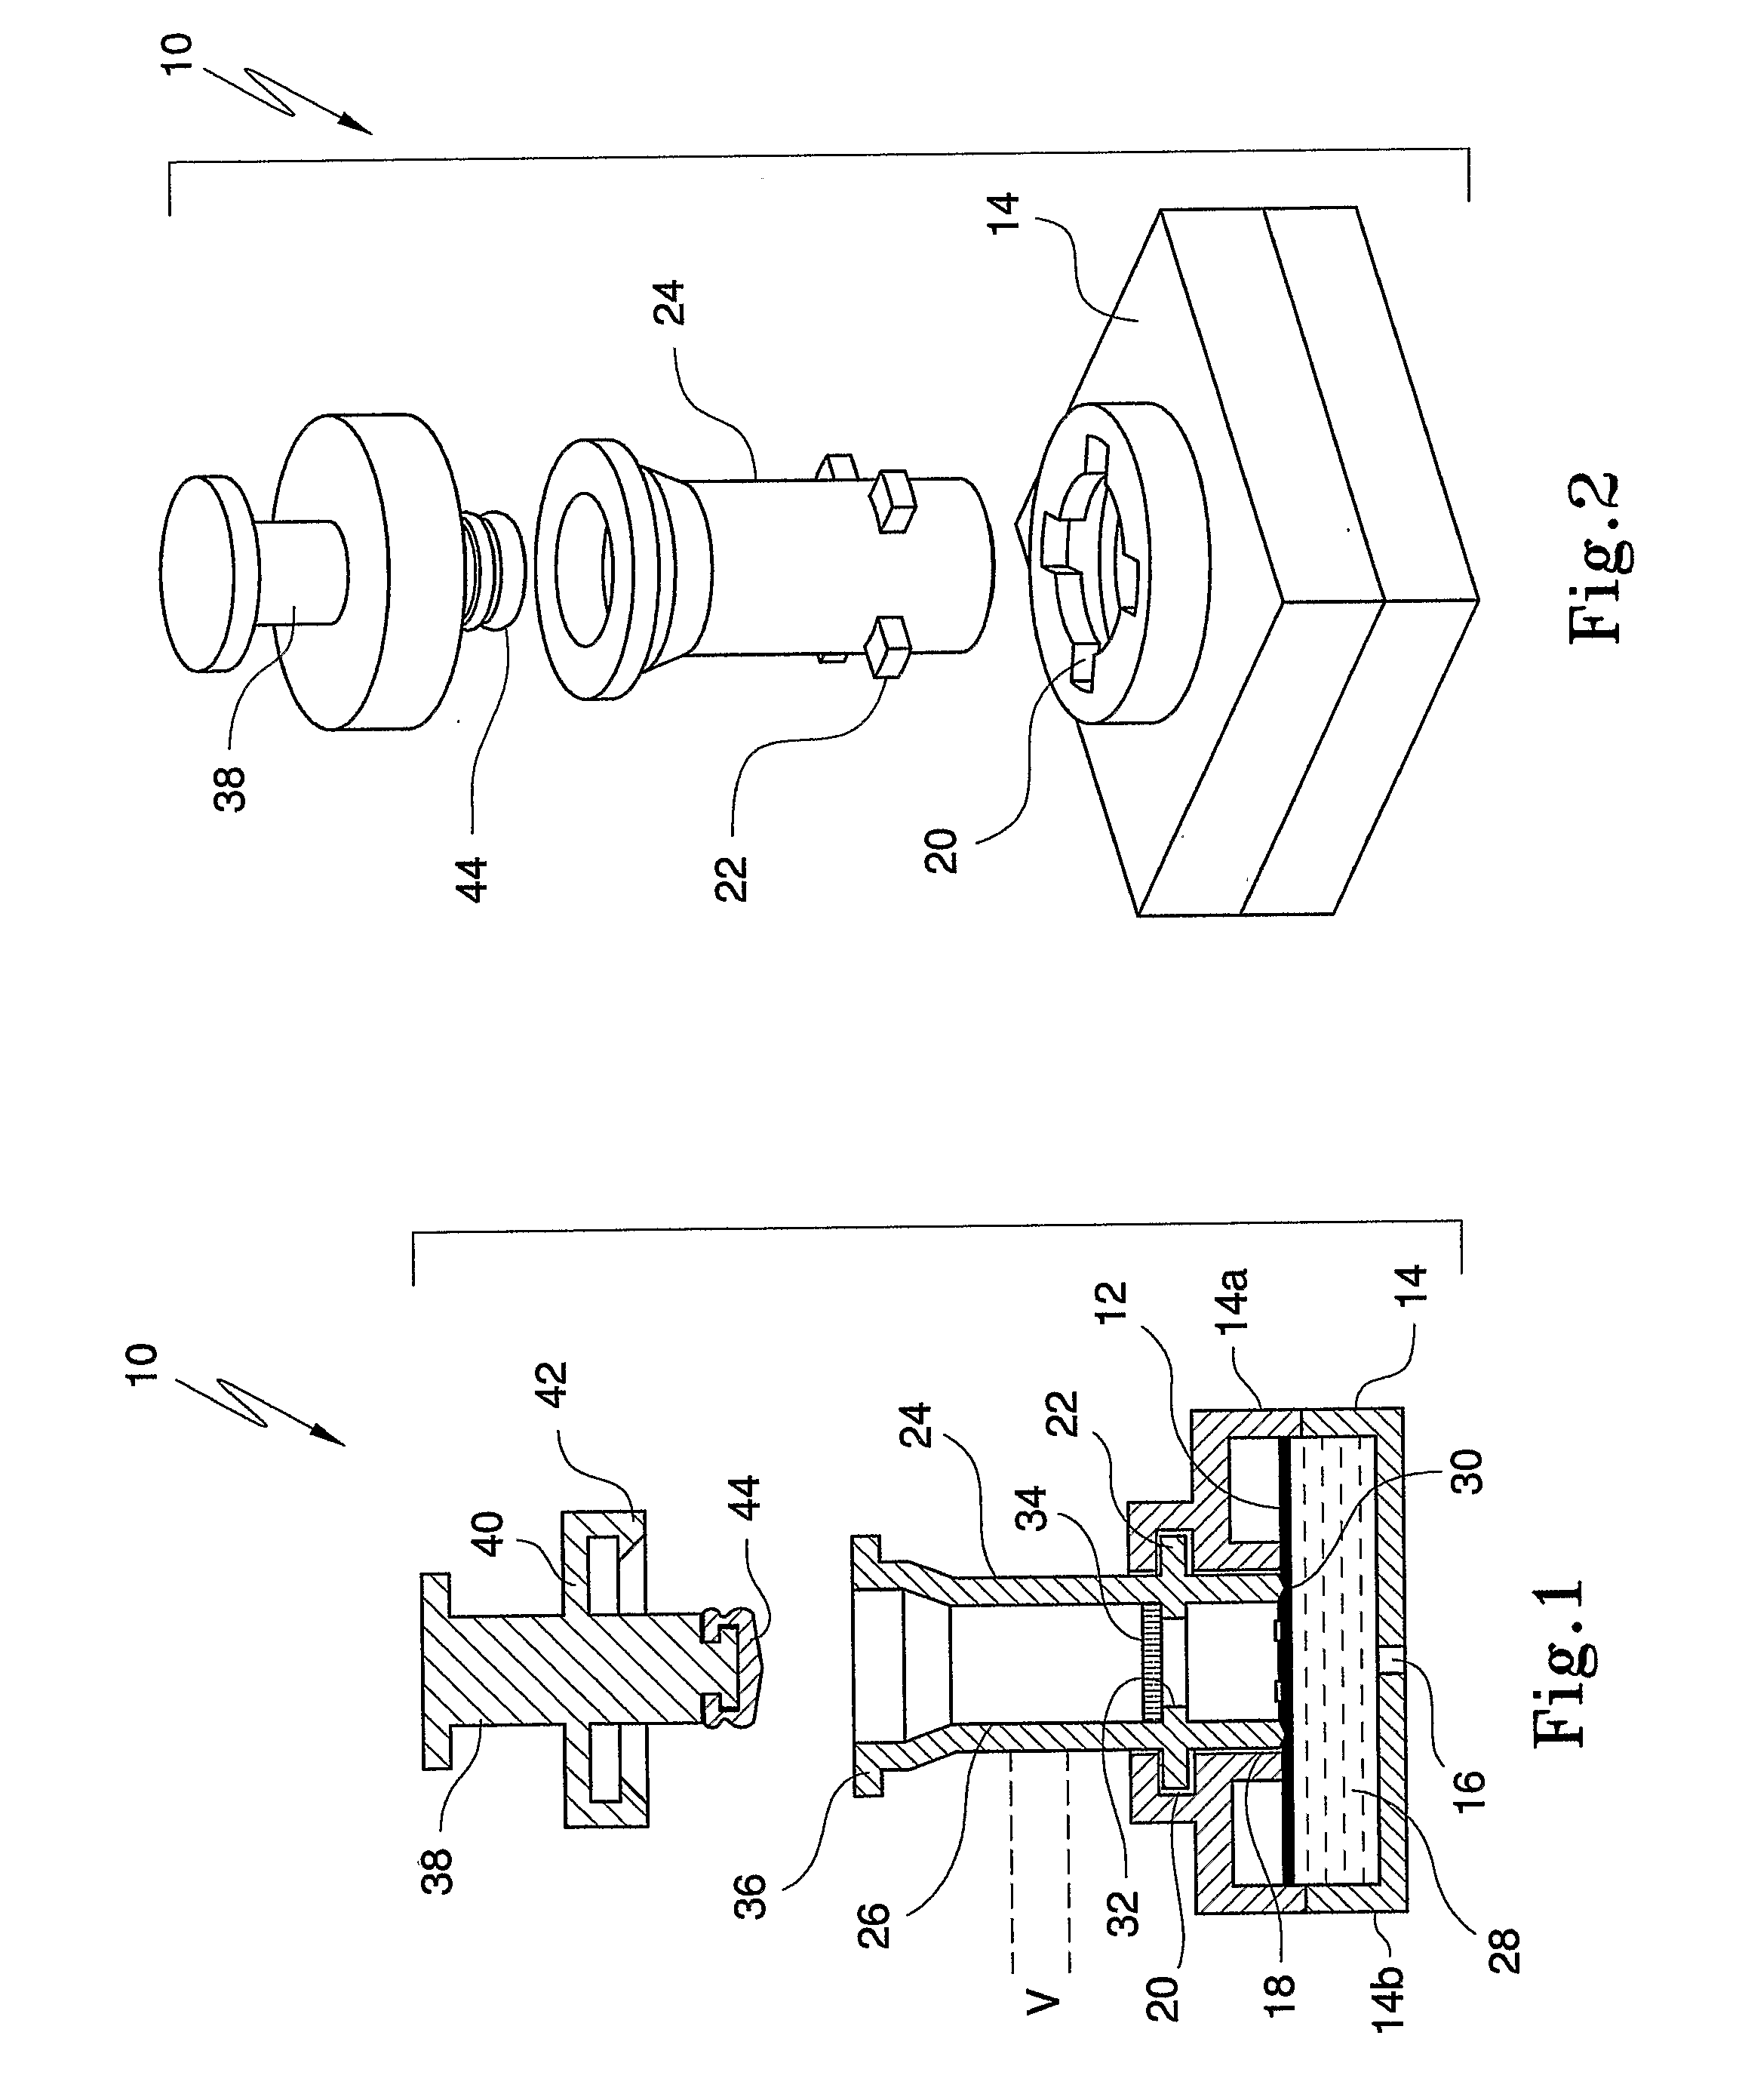 Diagnostic Testing Process and Apparatus Incorporating Controlled Sample Flow